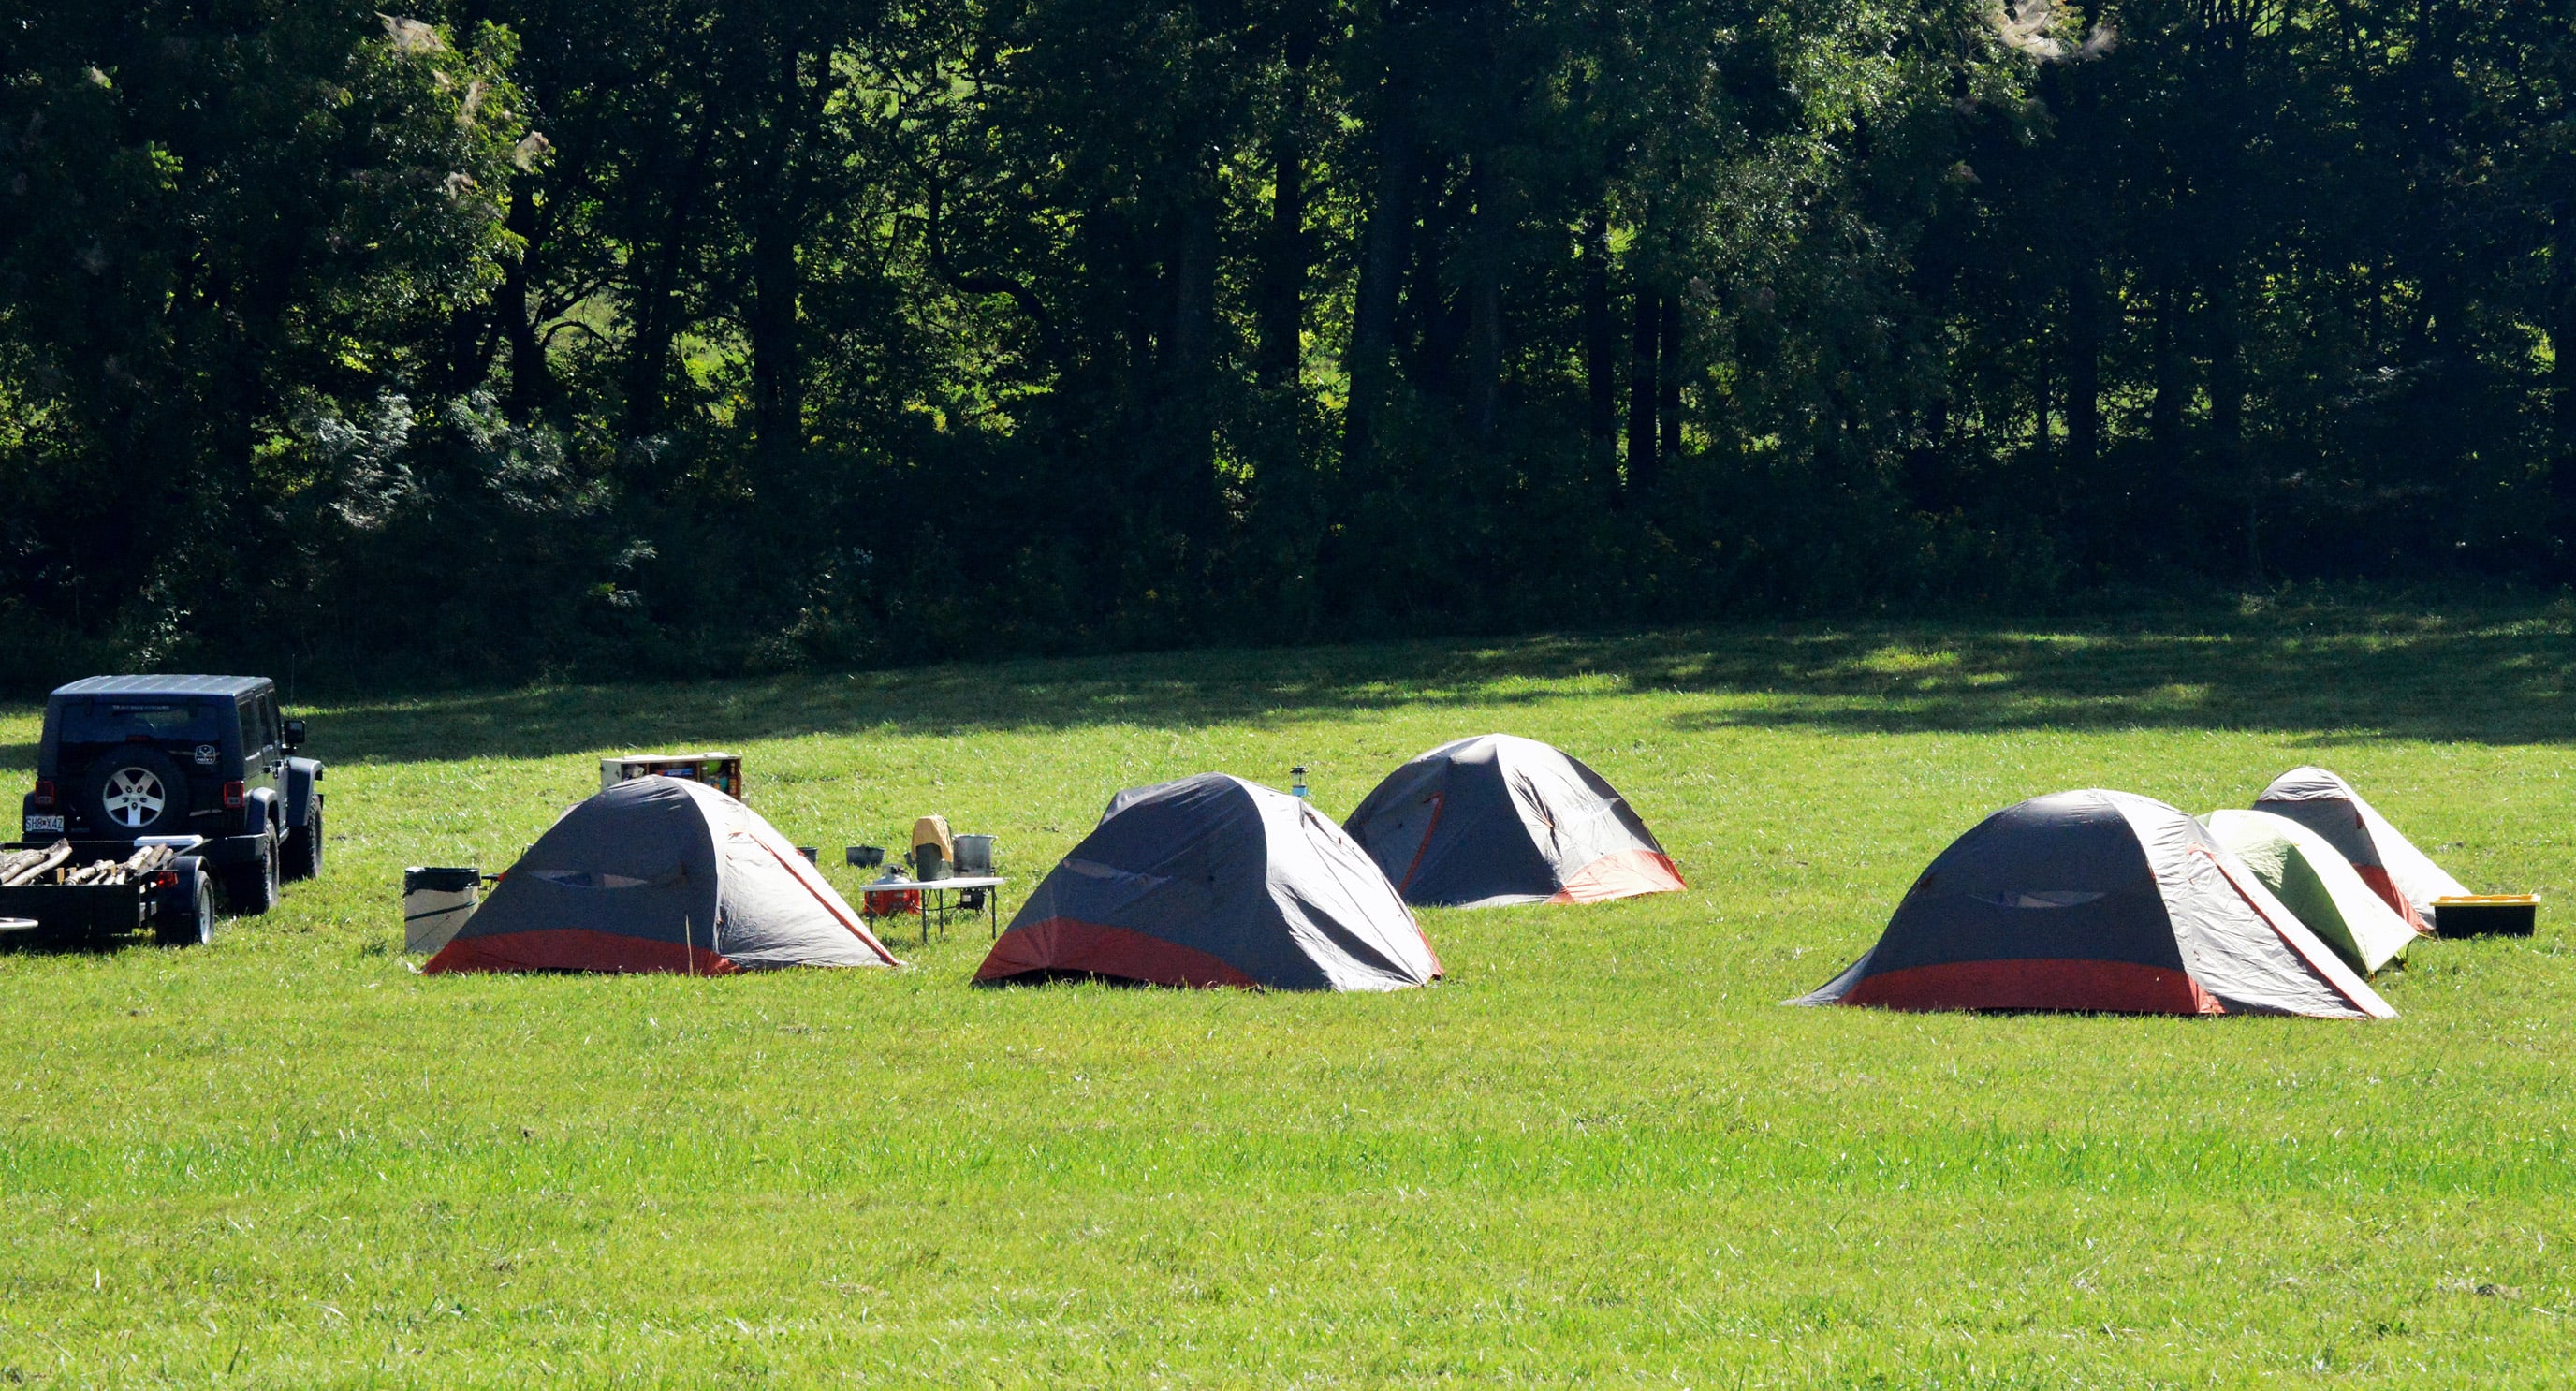 Group of tent Campers